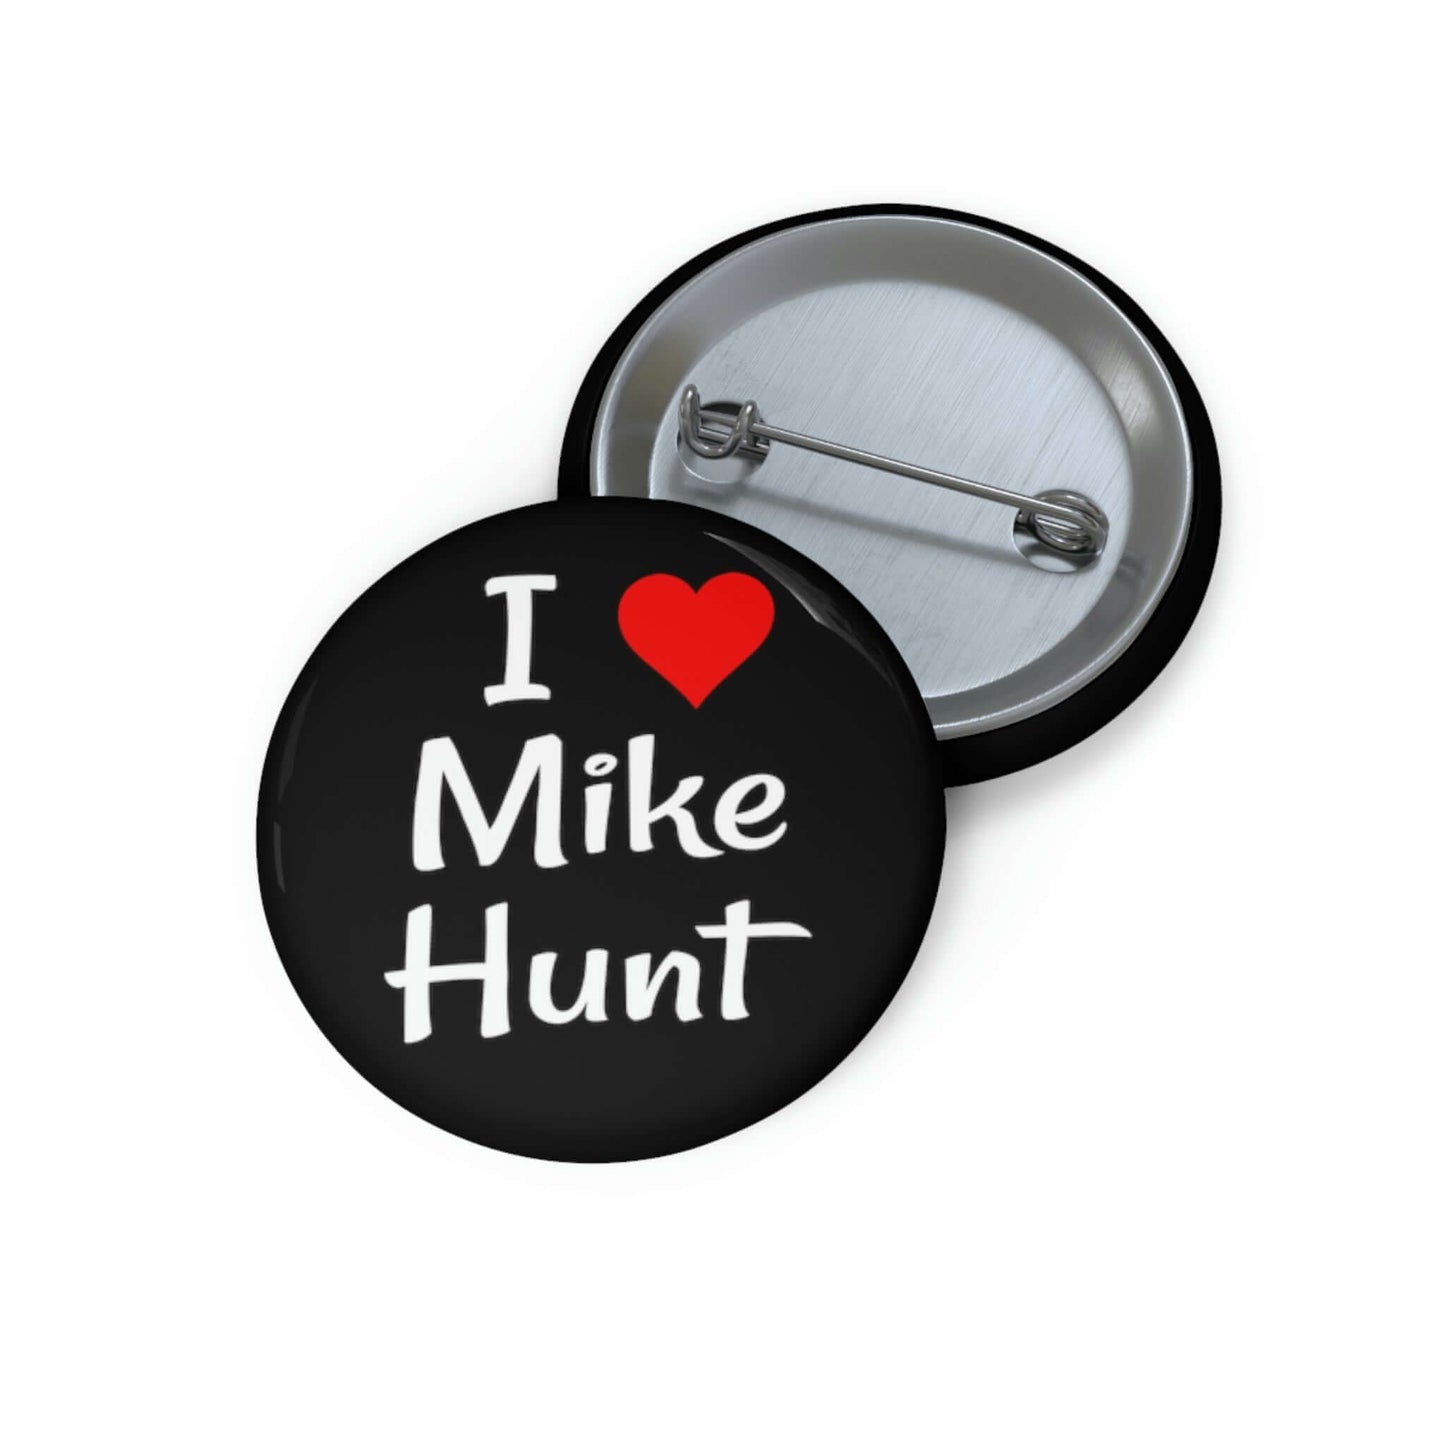 I love Mike Hunt pinback button